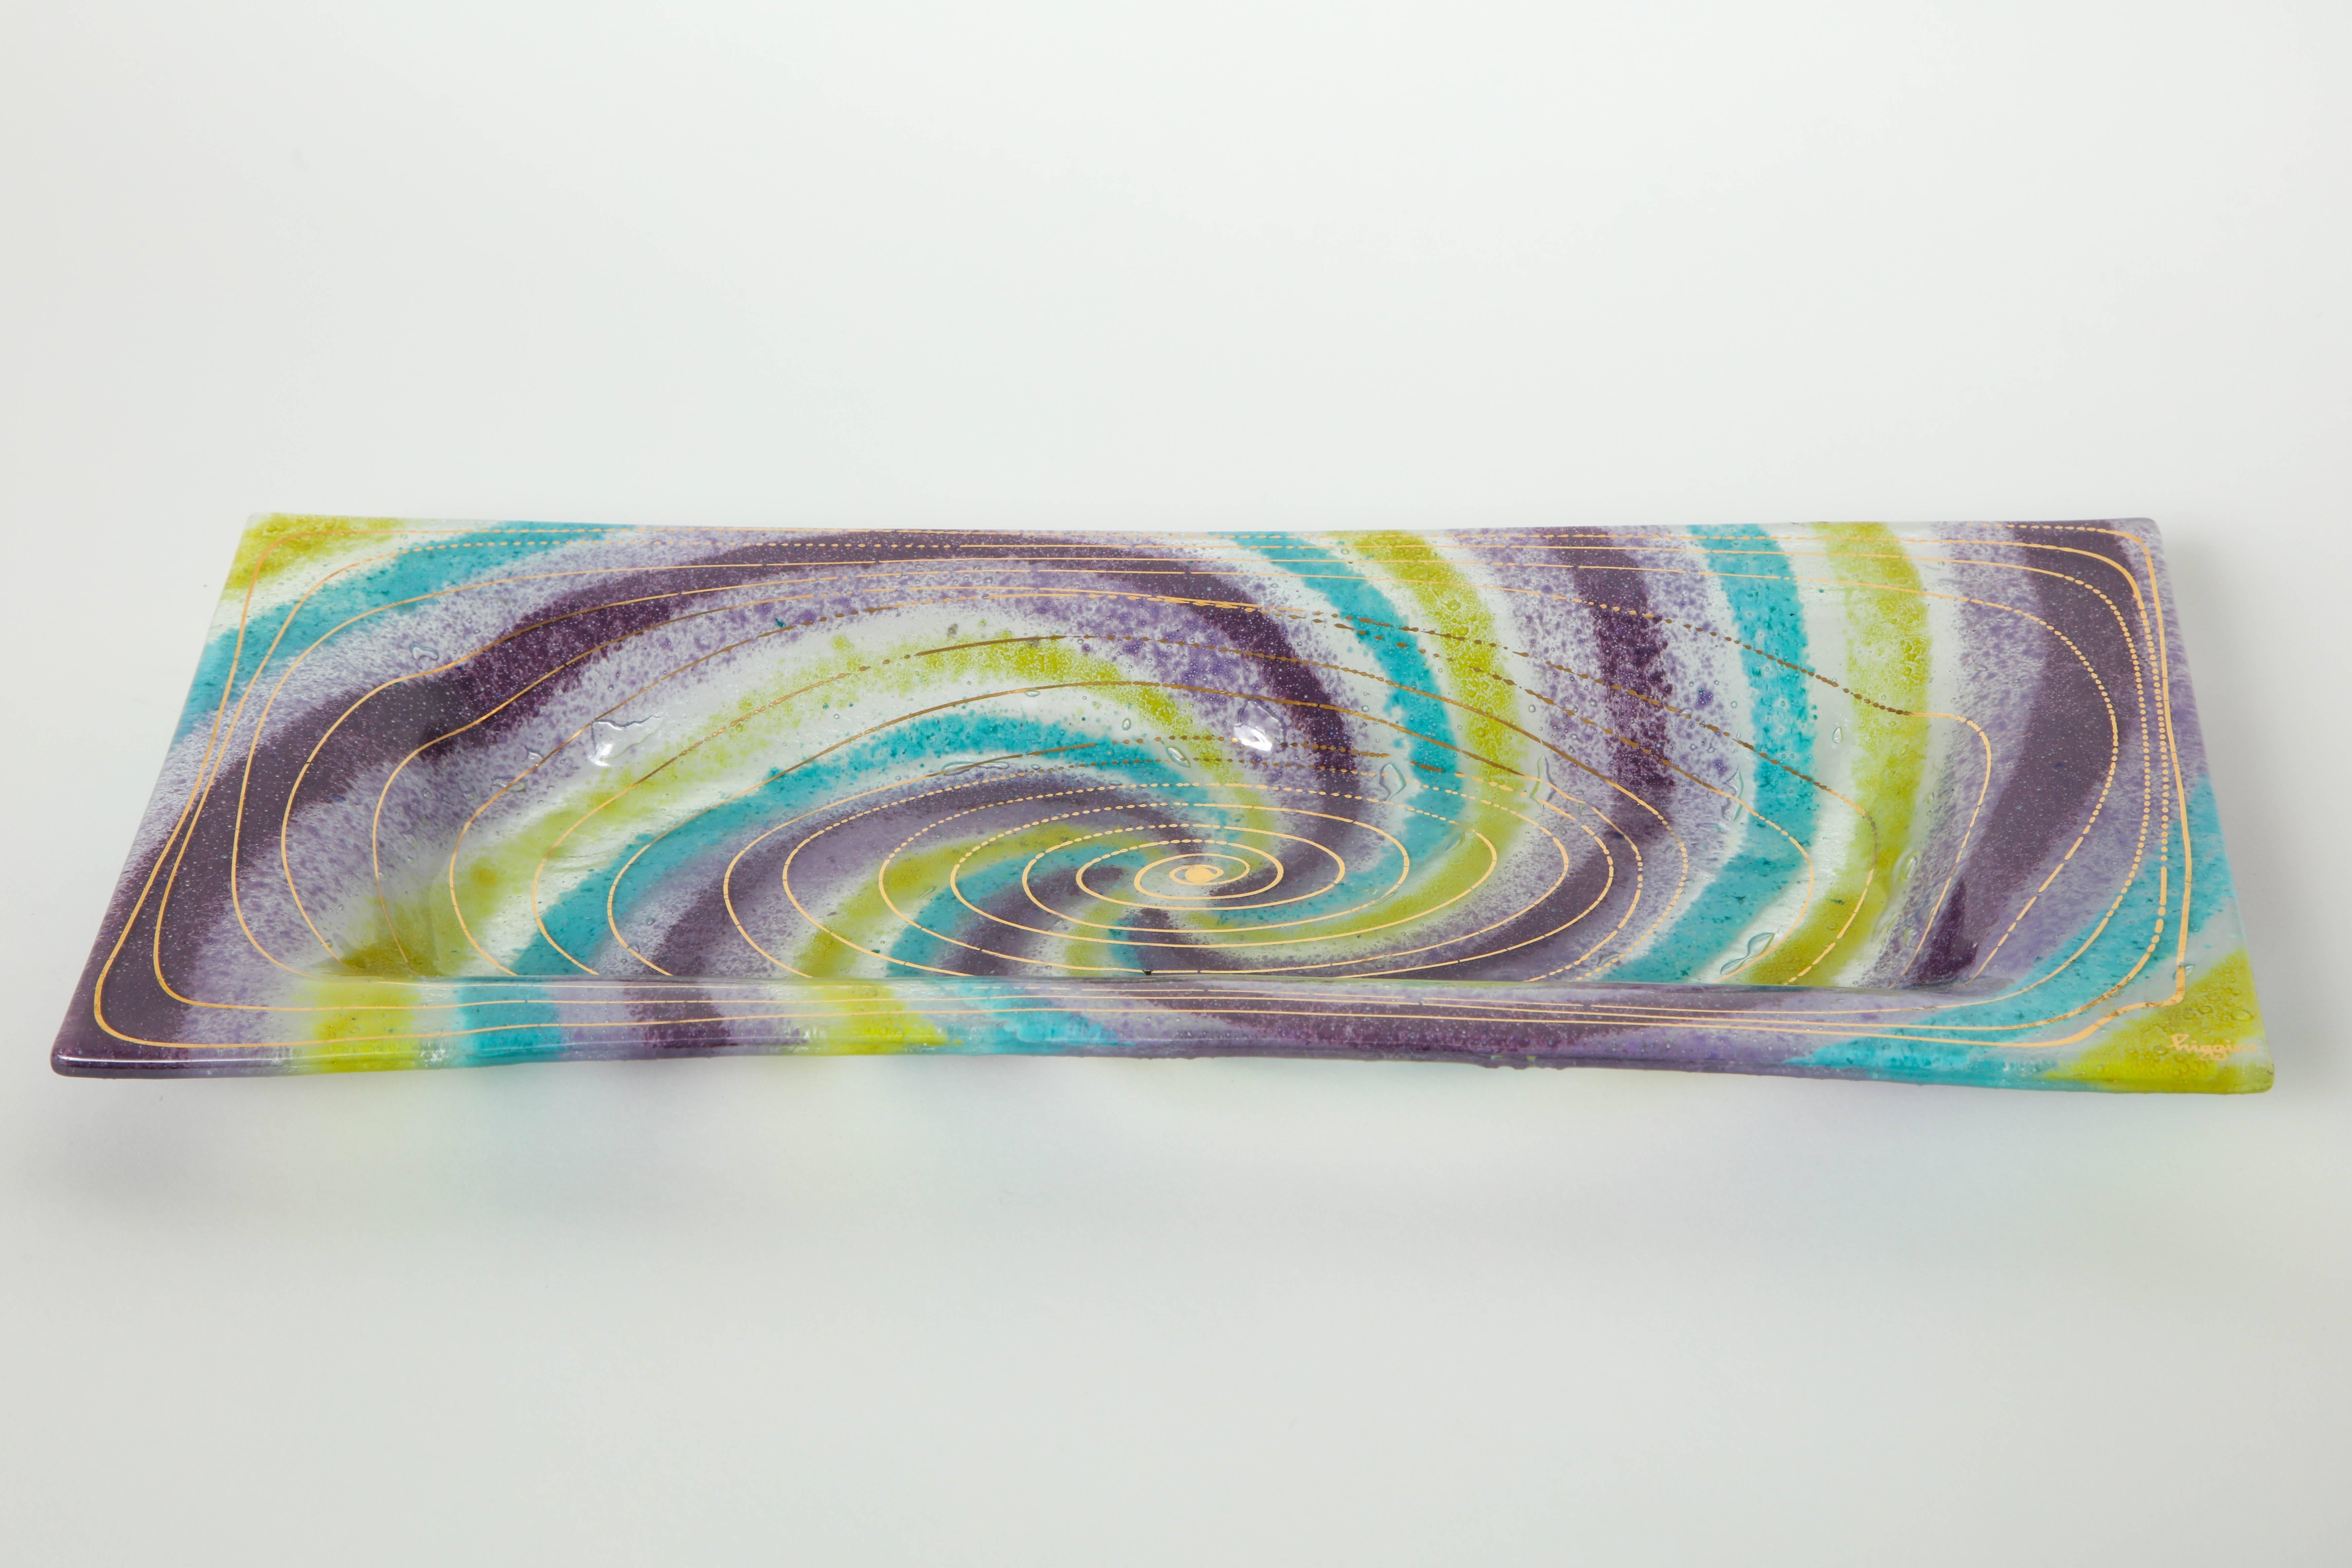 Colorful whimsical art glass rectangular dish with vibrant swirls of aqua, yellow and violet and metallic gold by Higgins, signed. Great for a catch all on a console, serving dish or a great alternative to a soap dish.